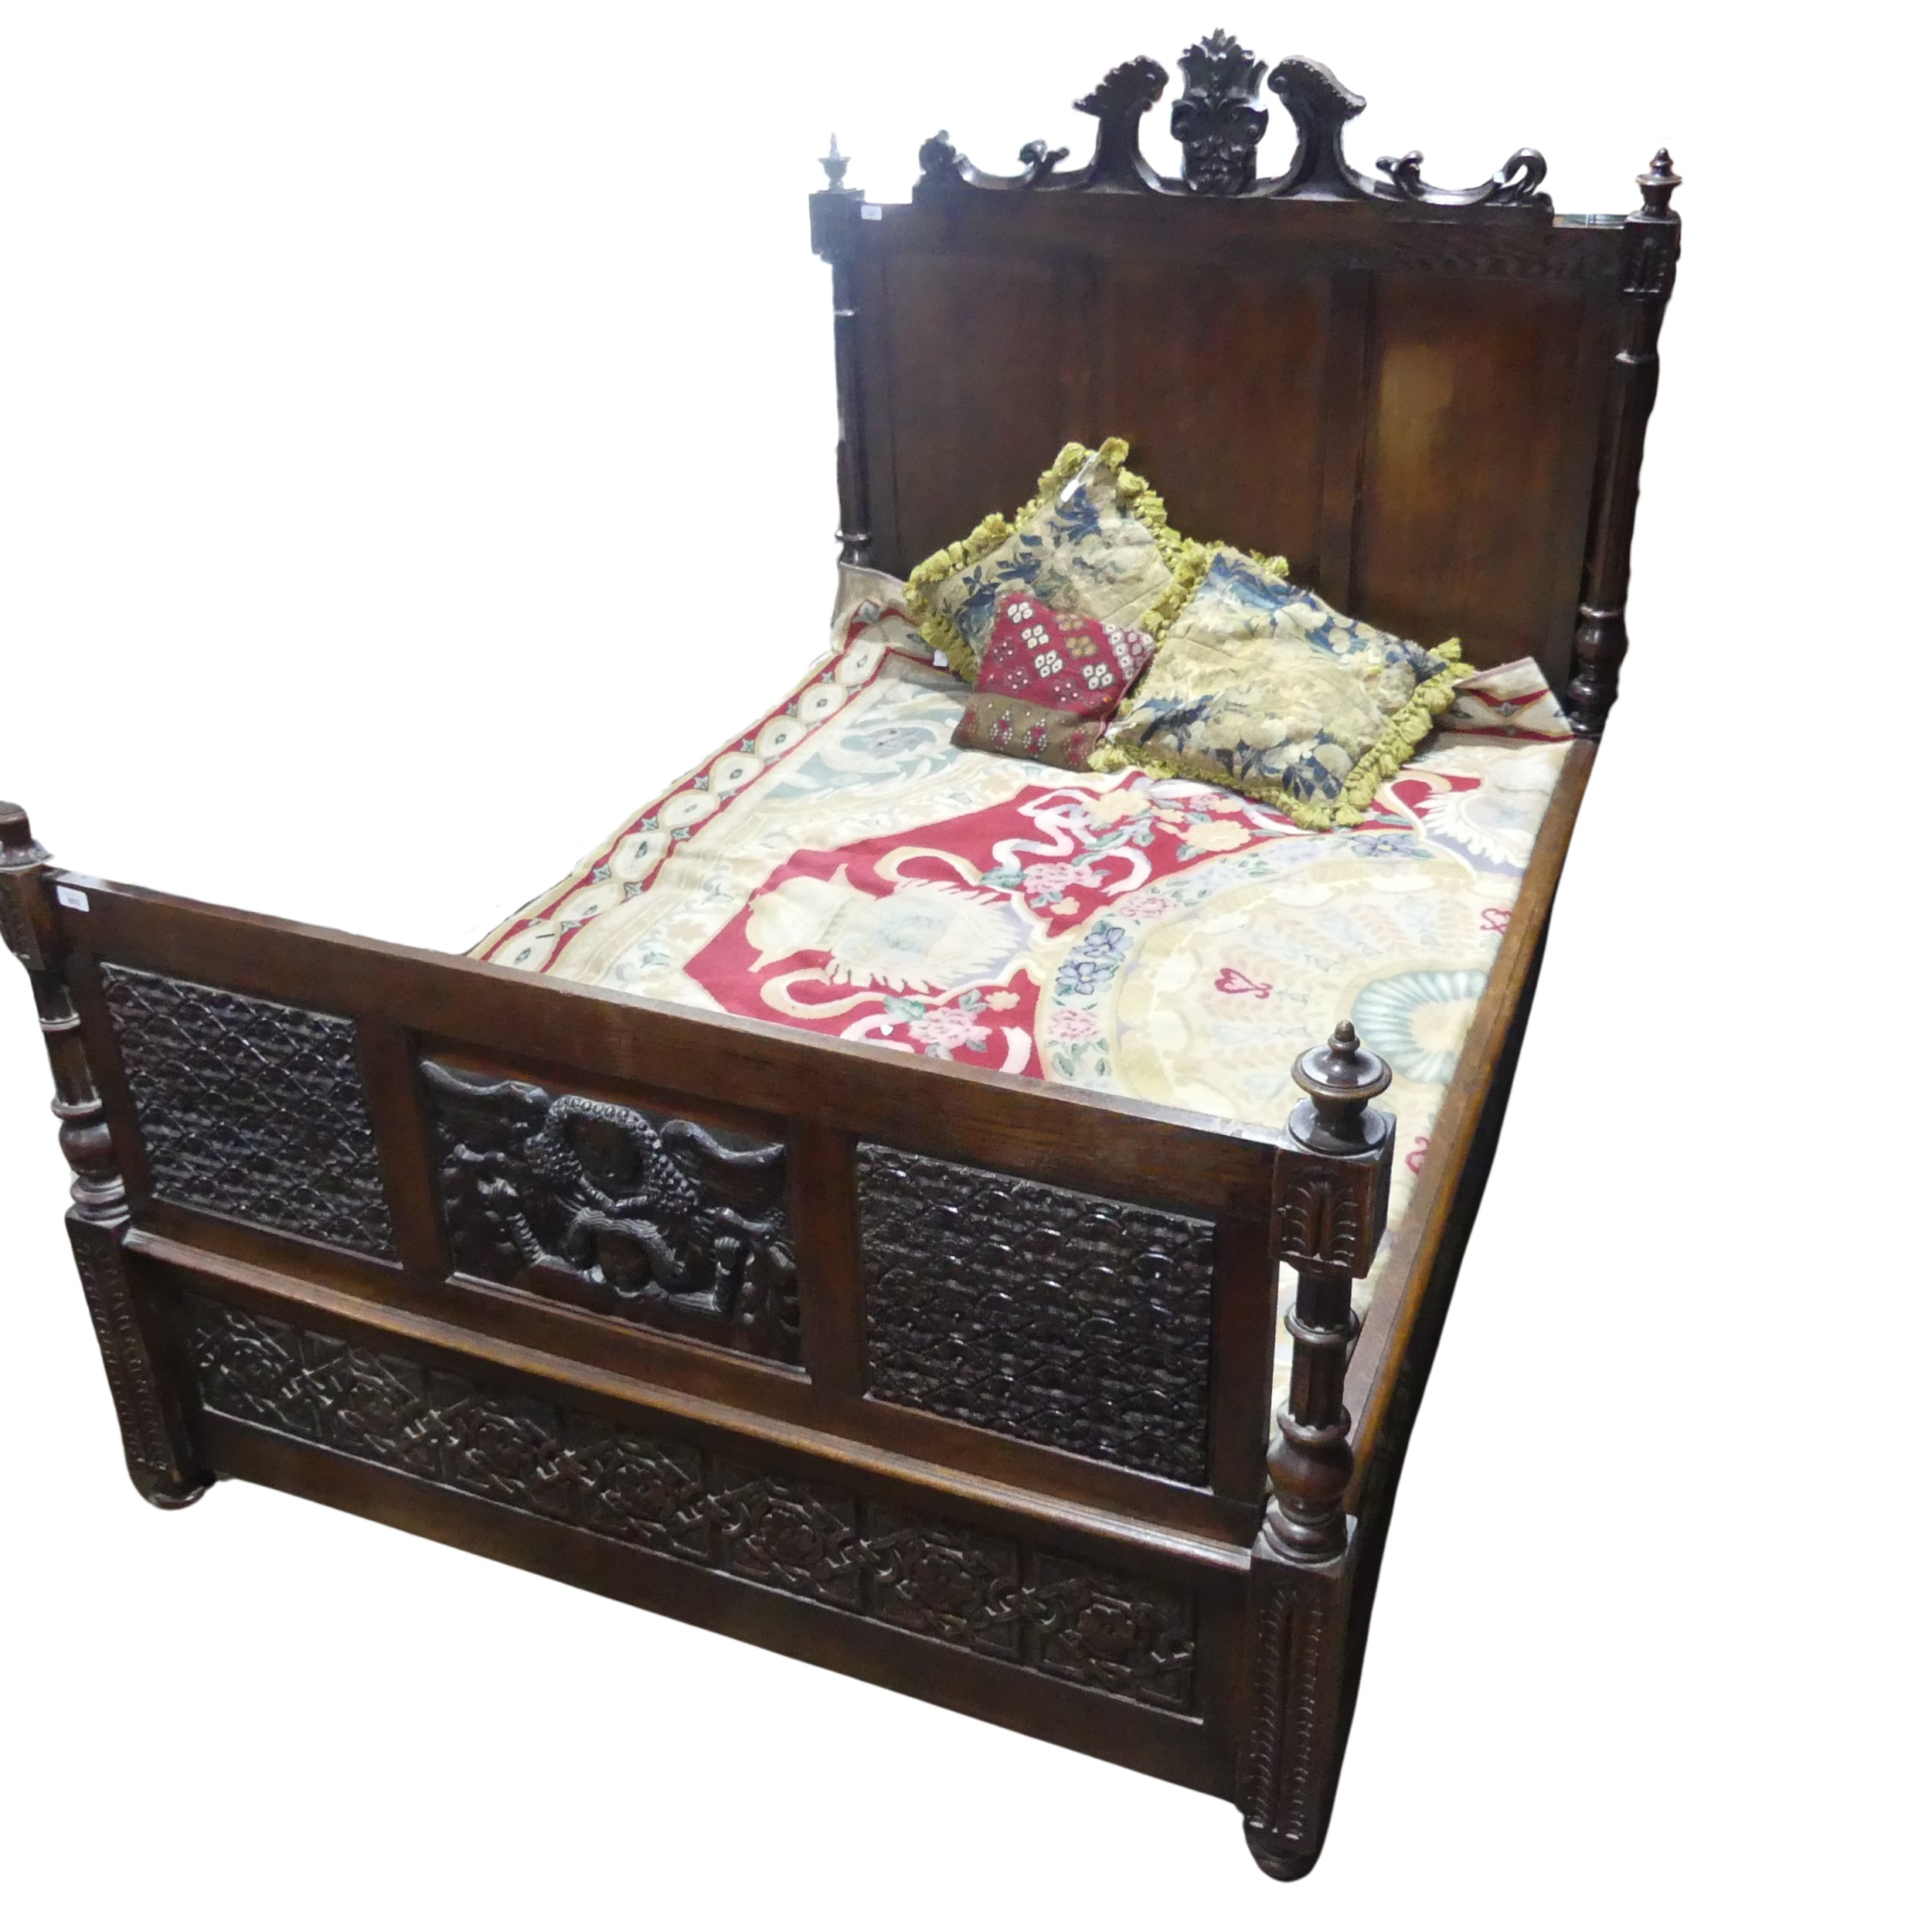 An antique carved oak framed double Bed, formed of 17th century and later oak carved panels, with